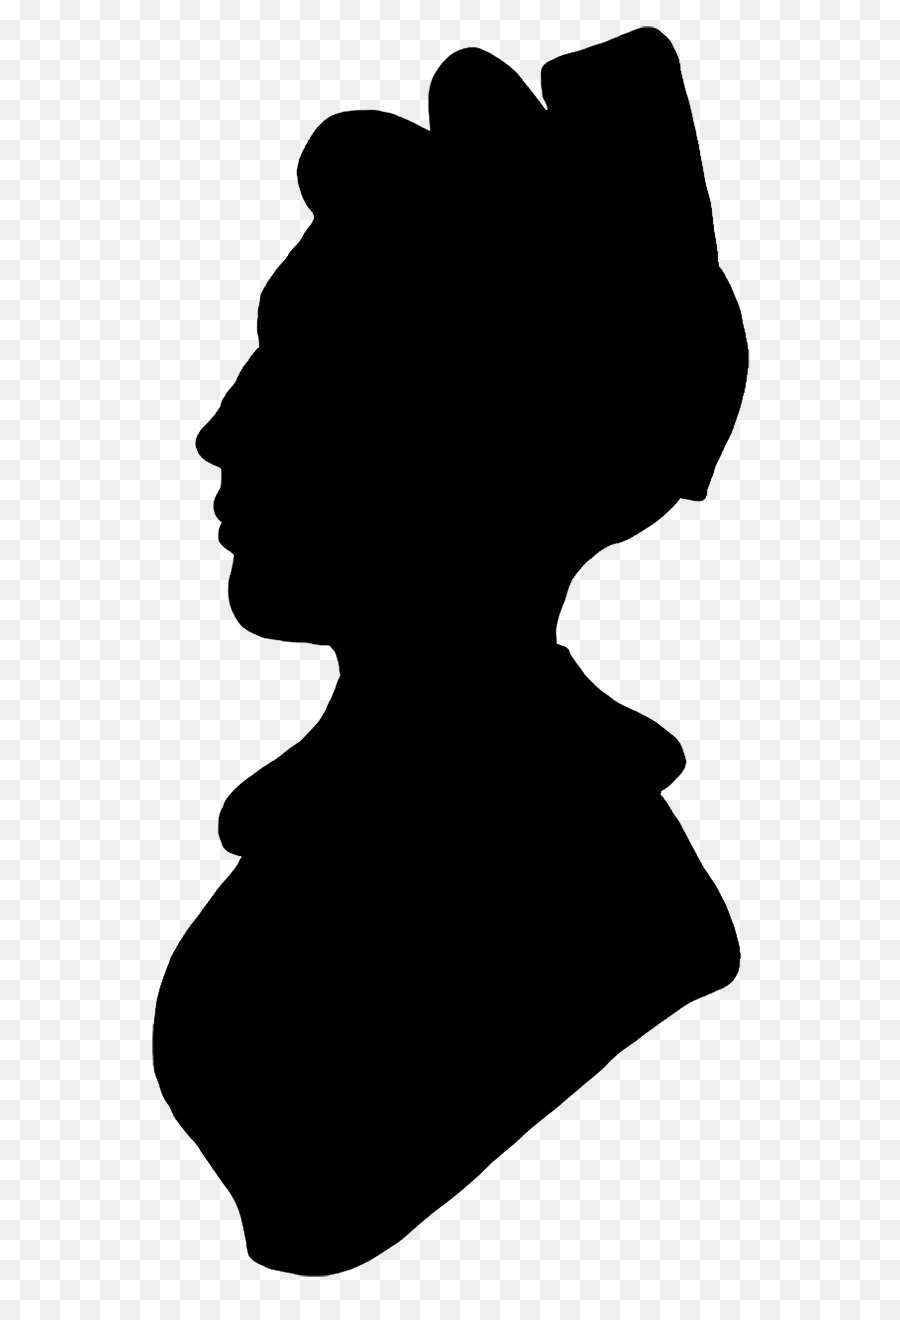 Woman with a Hat Silhouette Female Clip art - woman watercolor png download - 709*1314 - Free Transparent Woman With A Hat png Download.